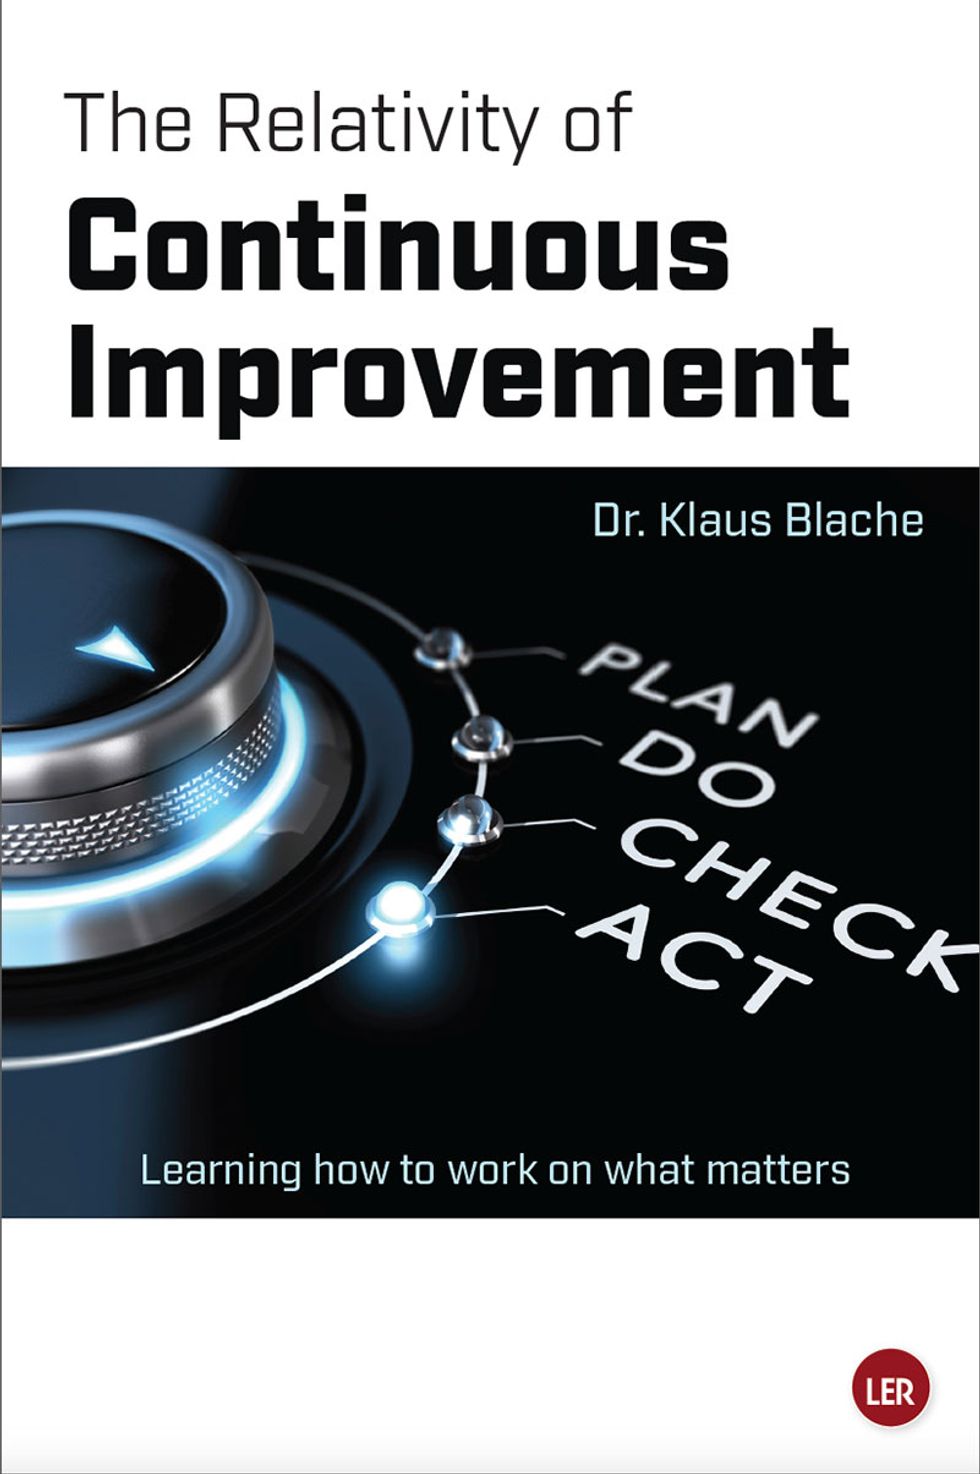  The Relativity of Continuous Improvement 